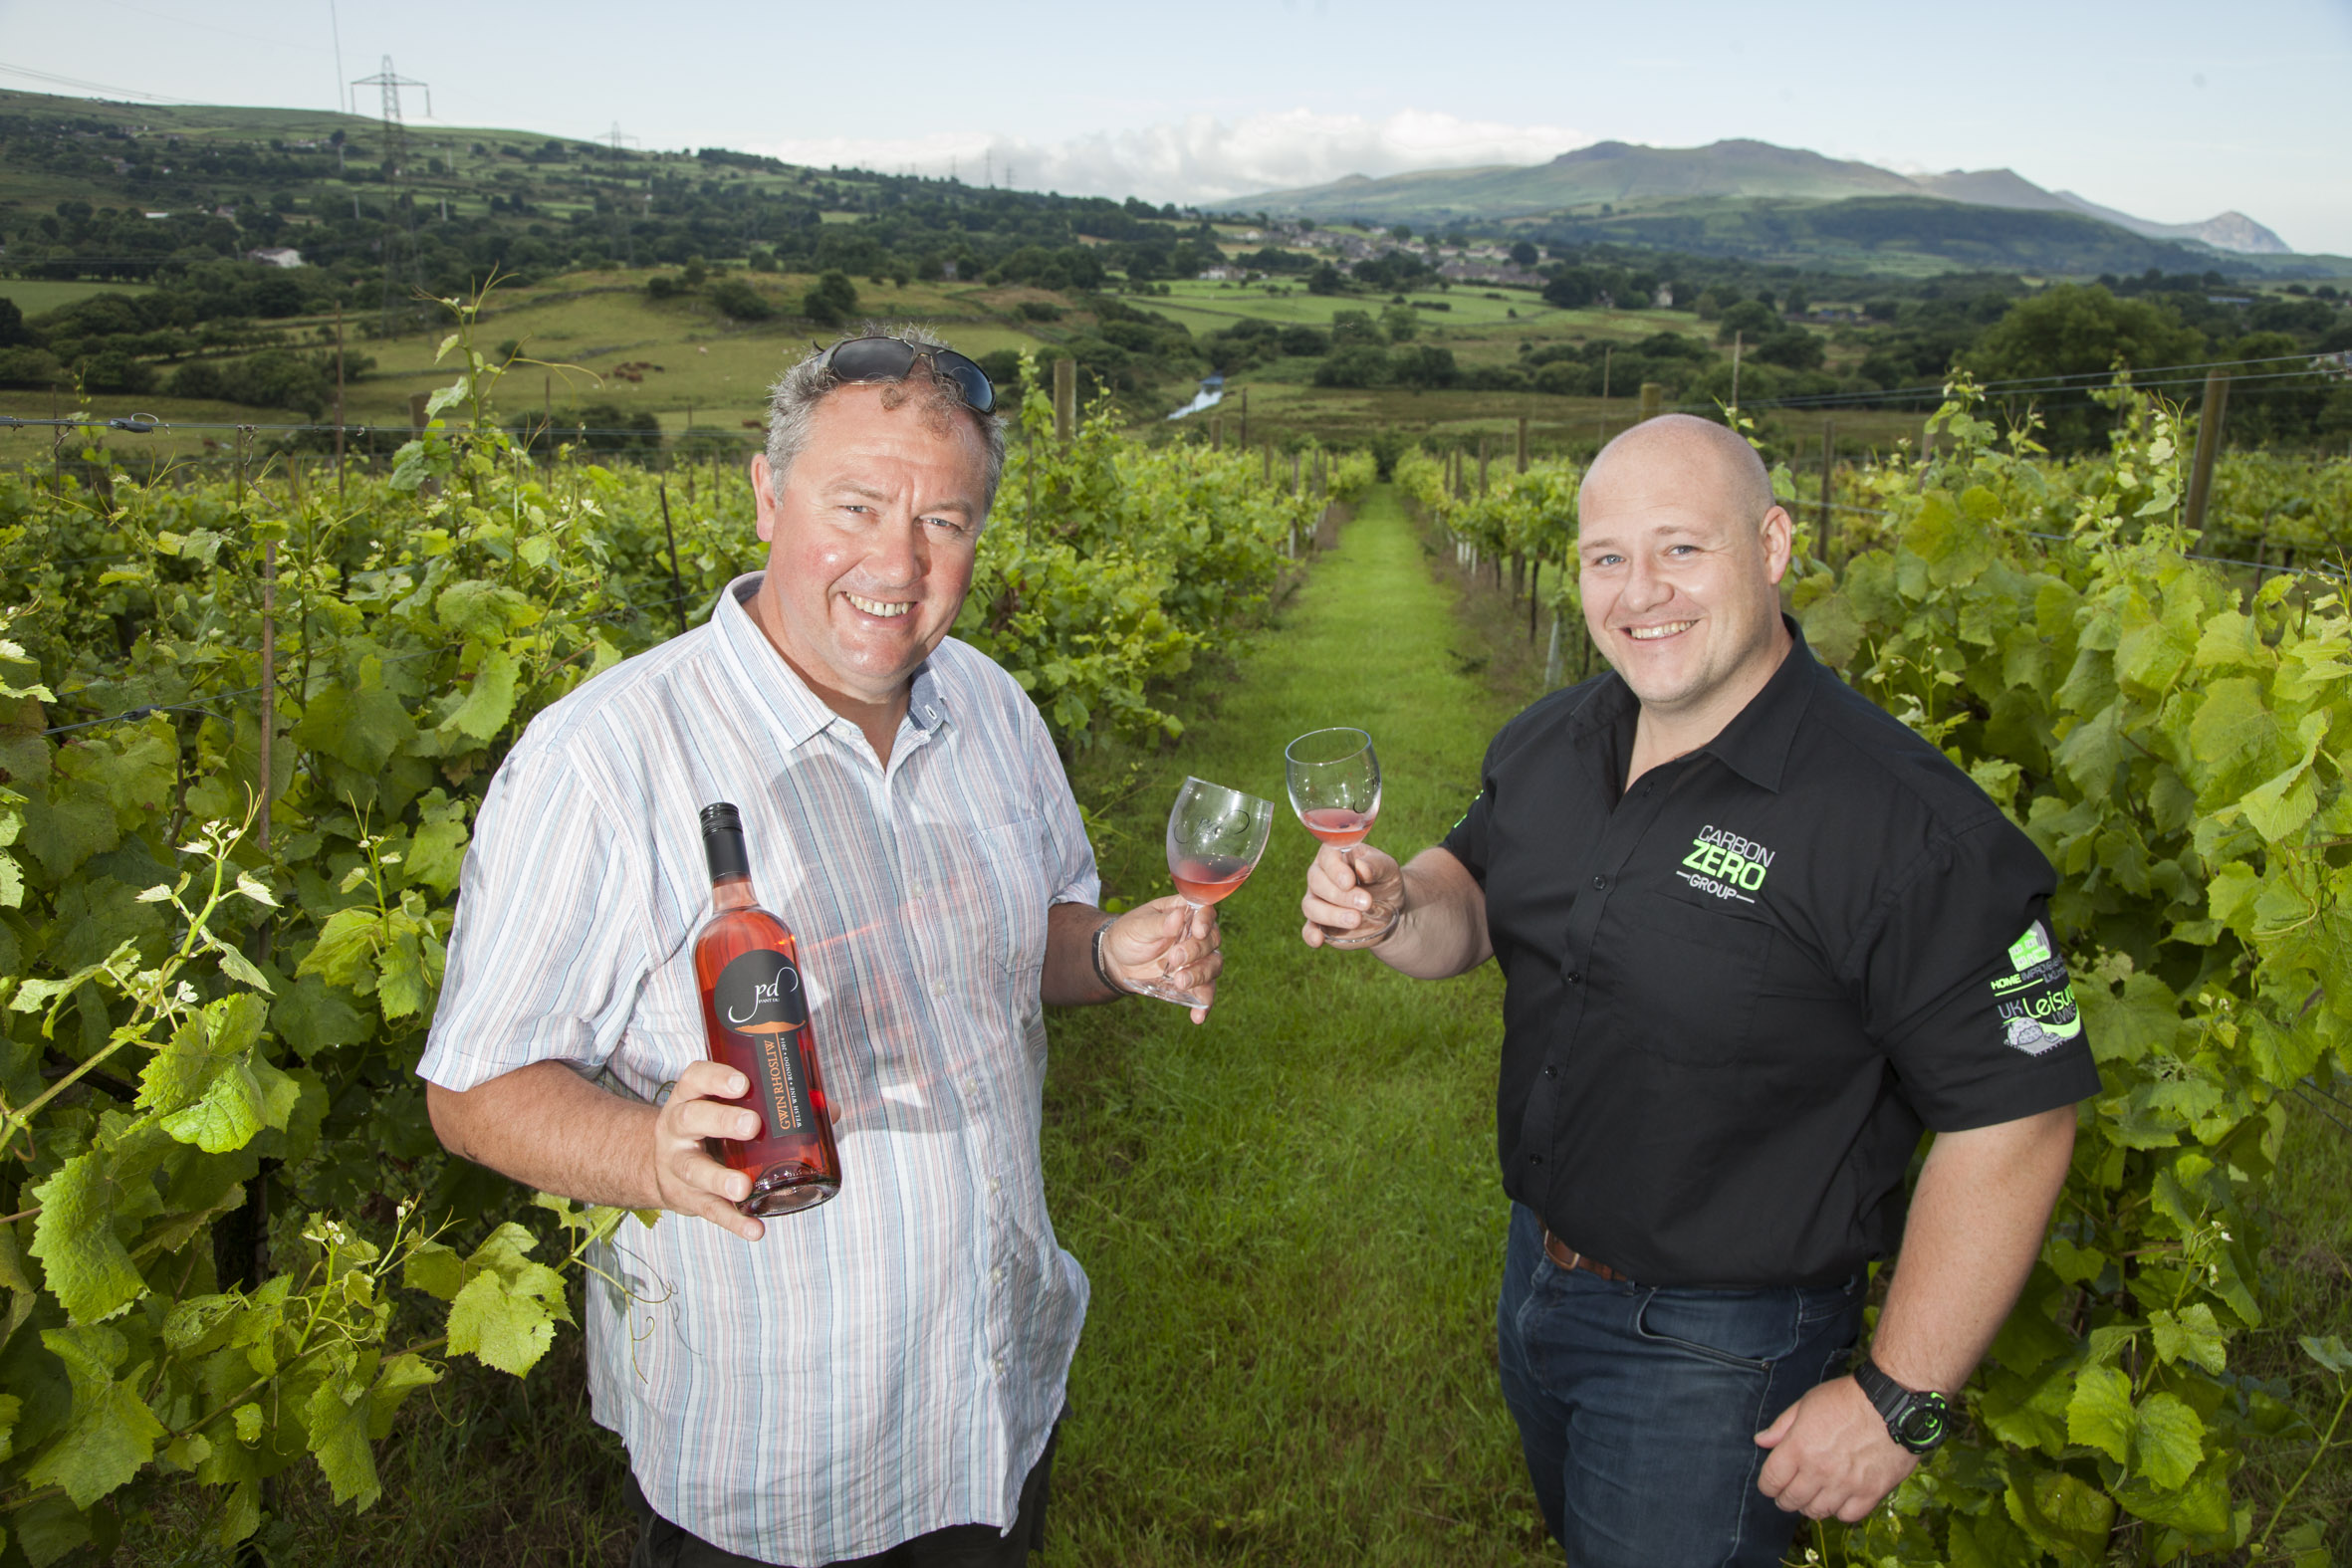 TV cameraman focuses on free energy at Wales’s first solar powered vineyard